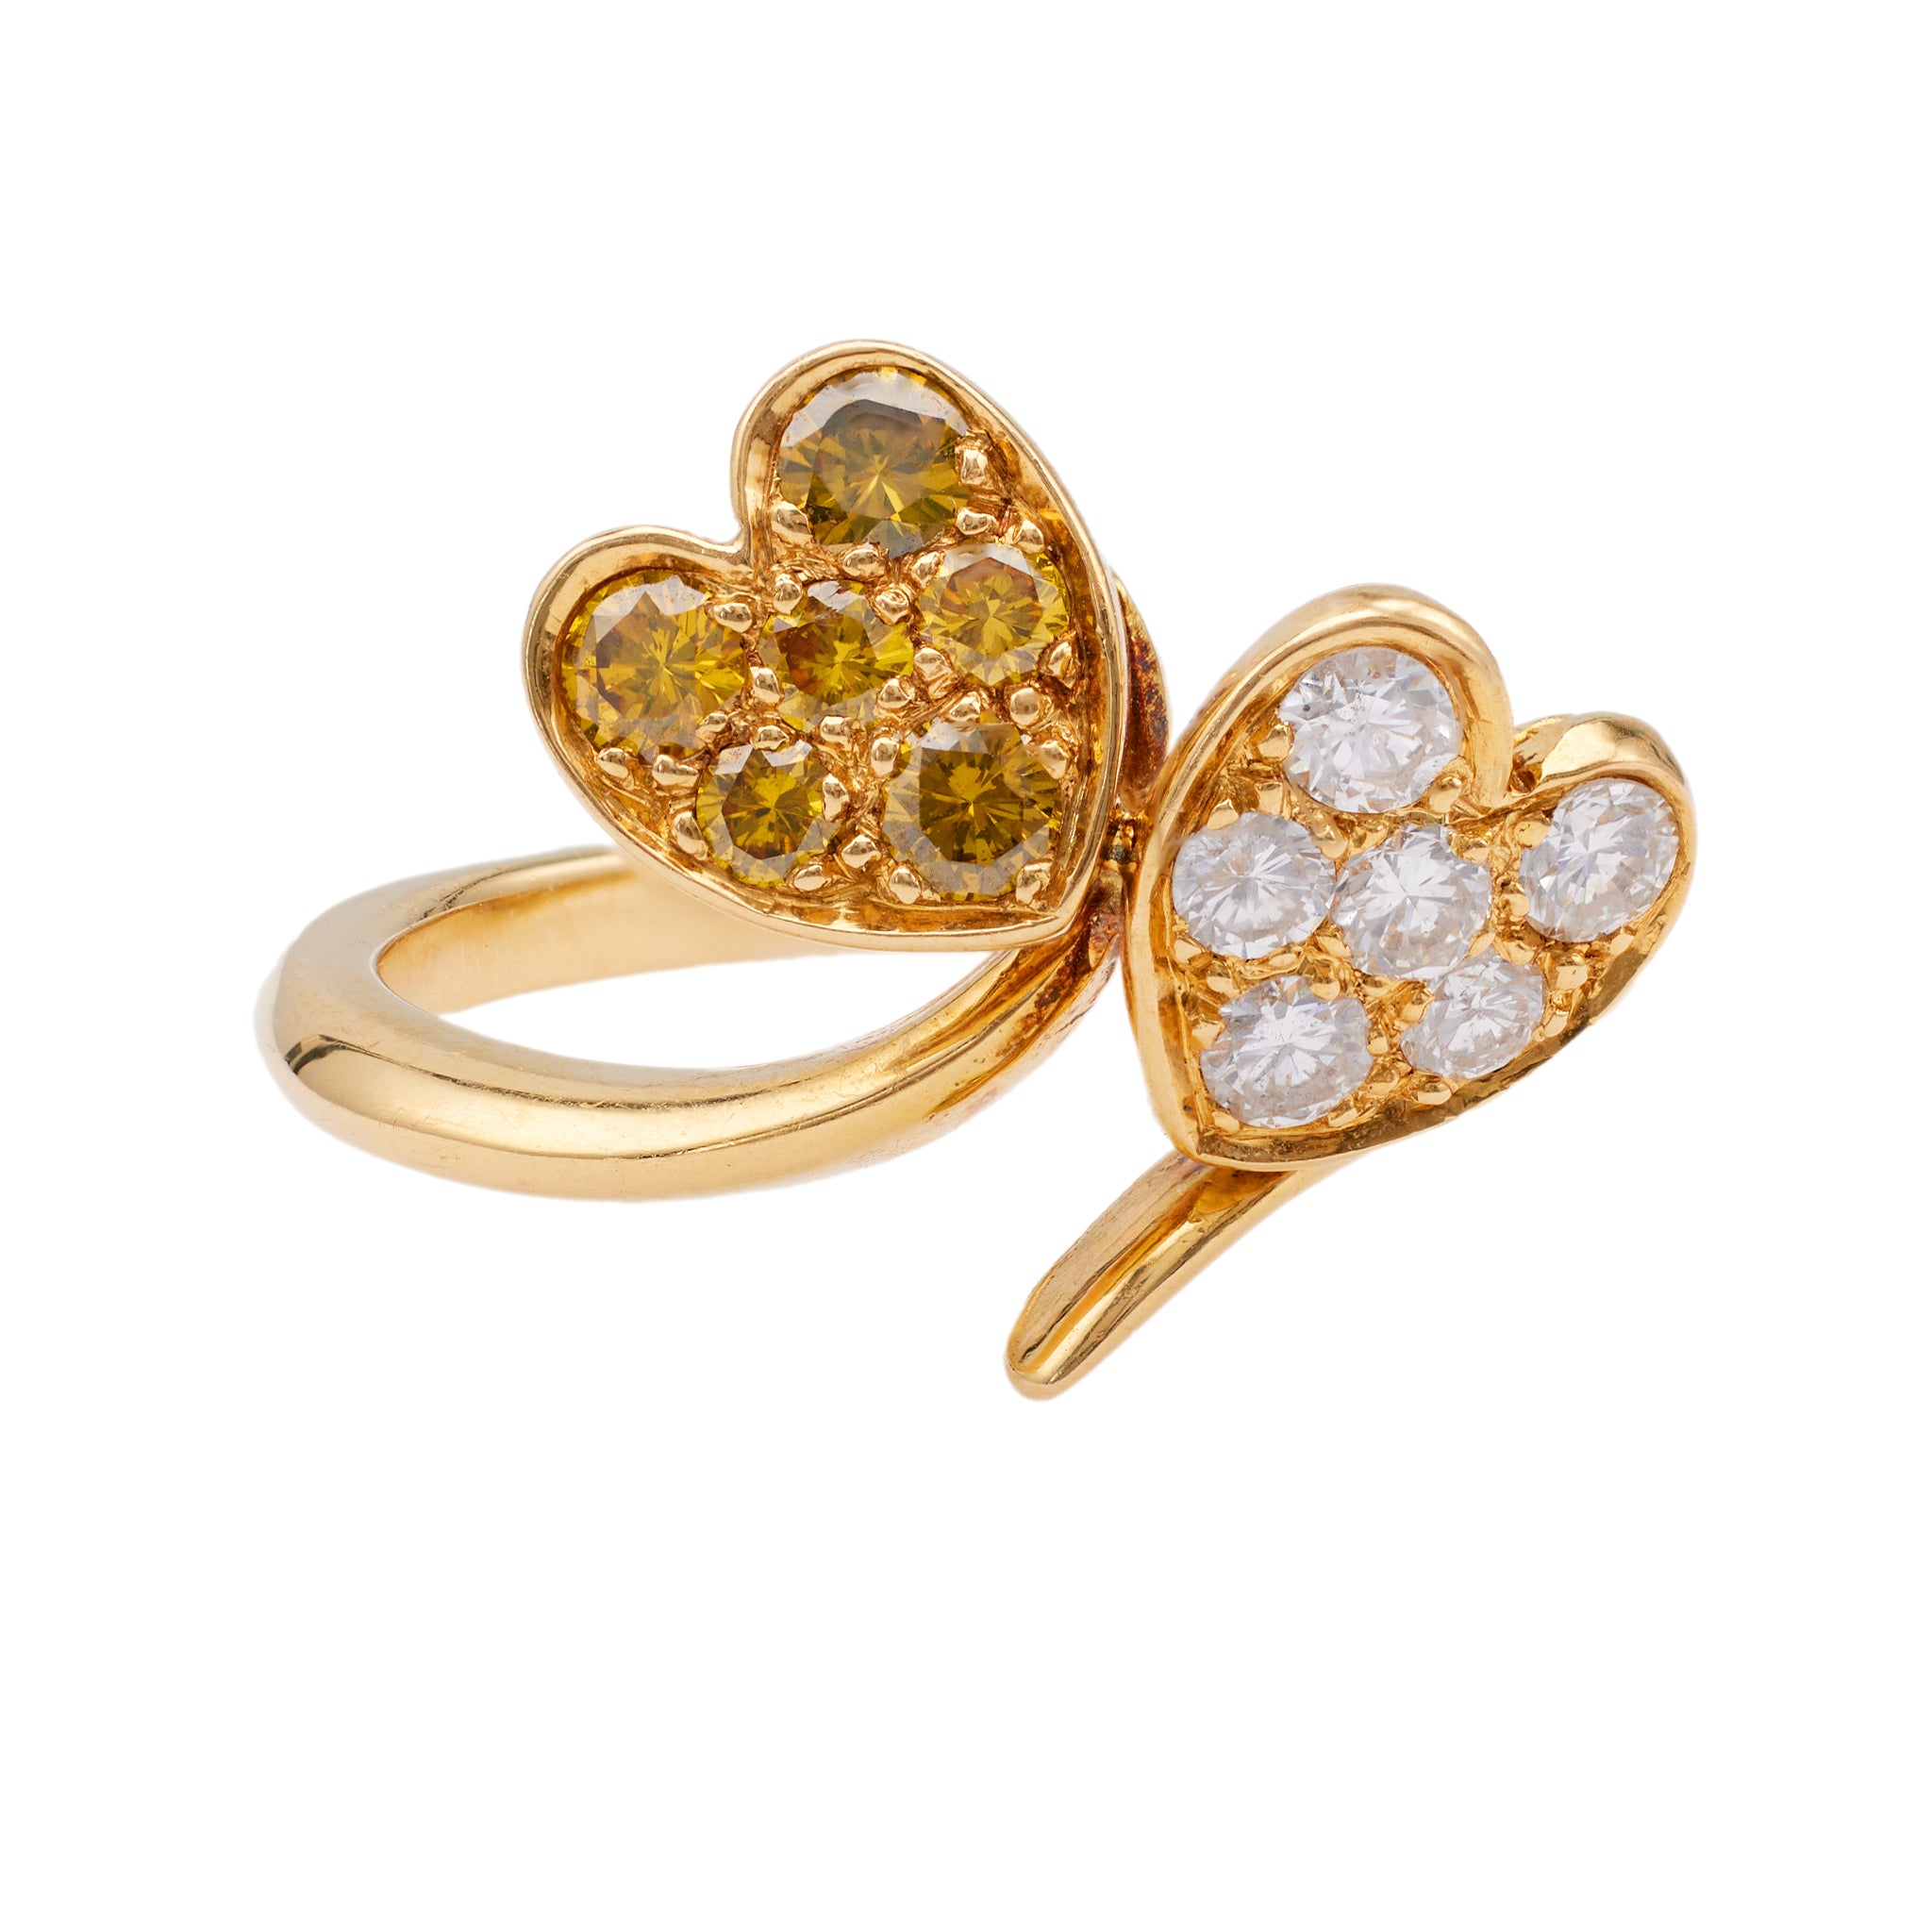 Vintage French Diamond 18k Yellow Gold Double Heart Ring